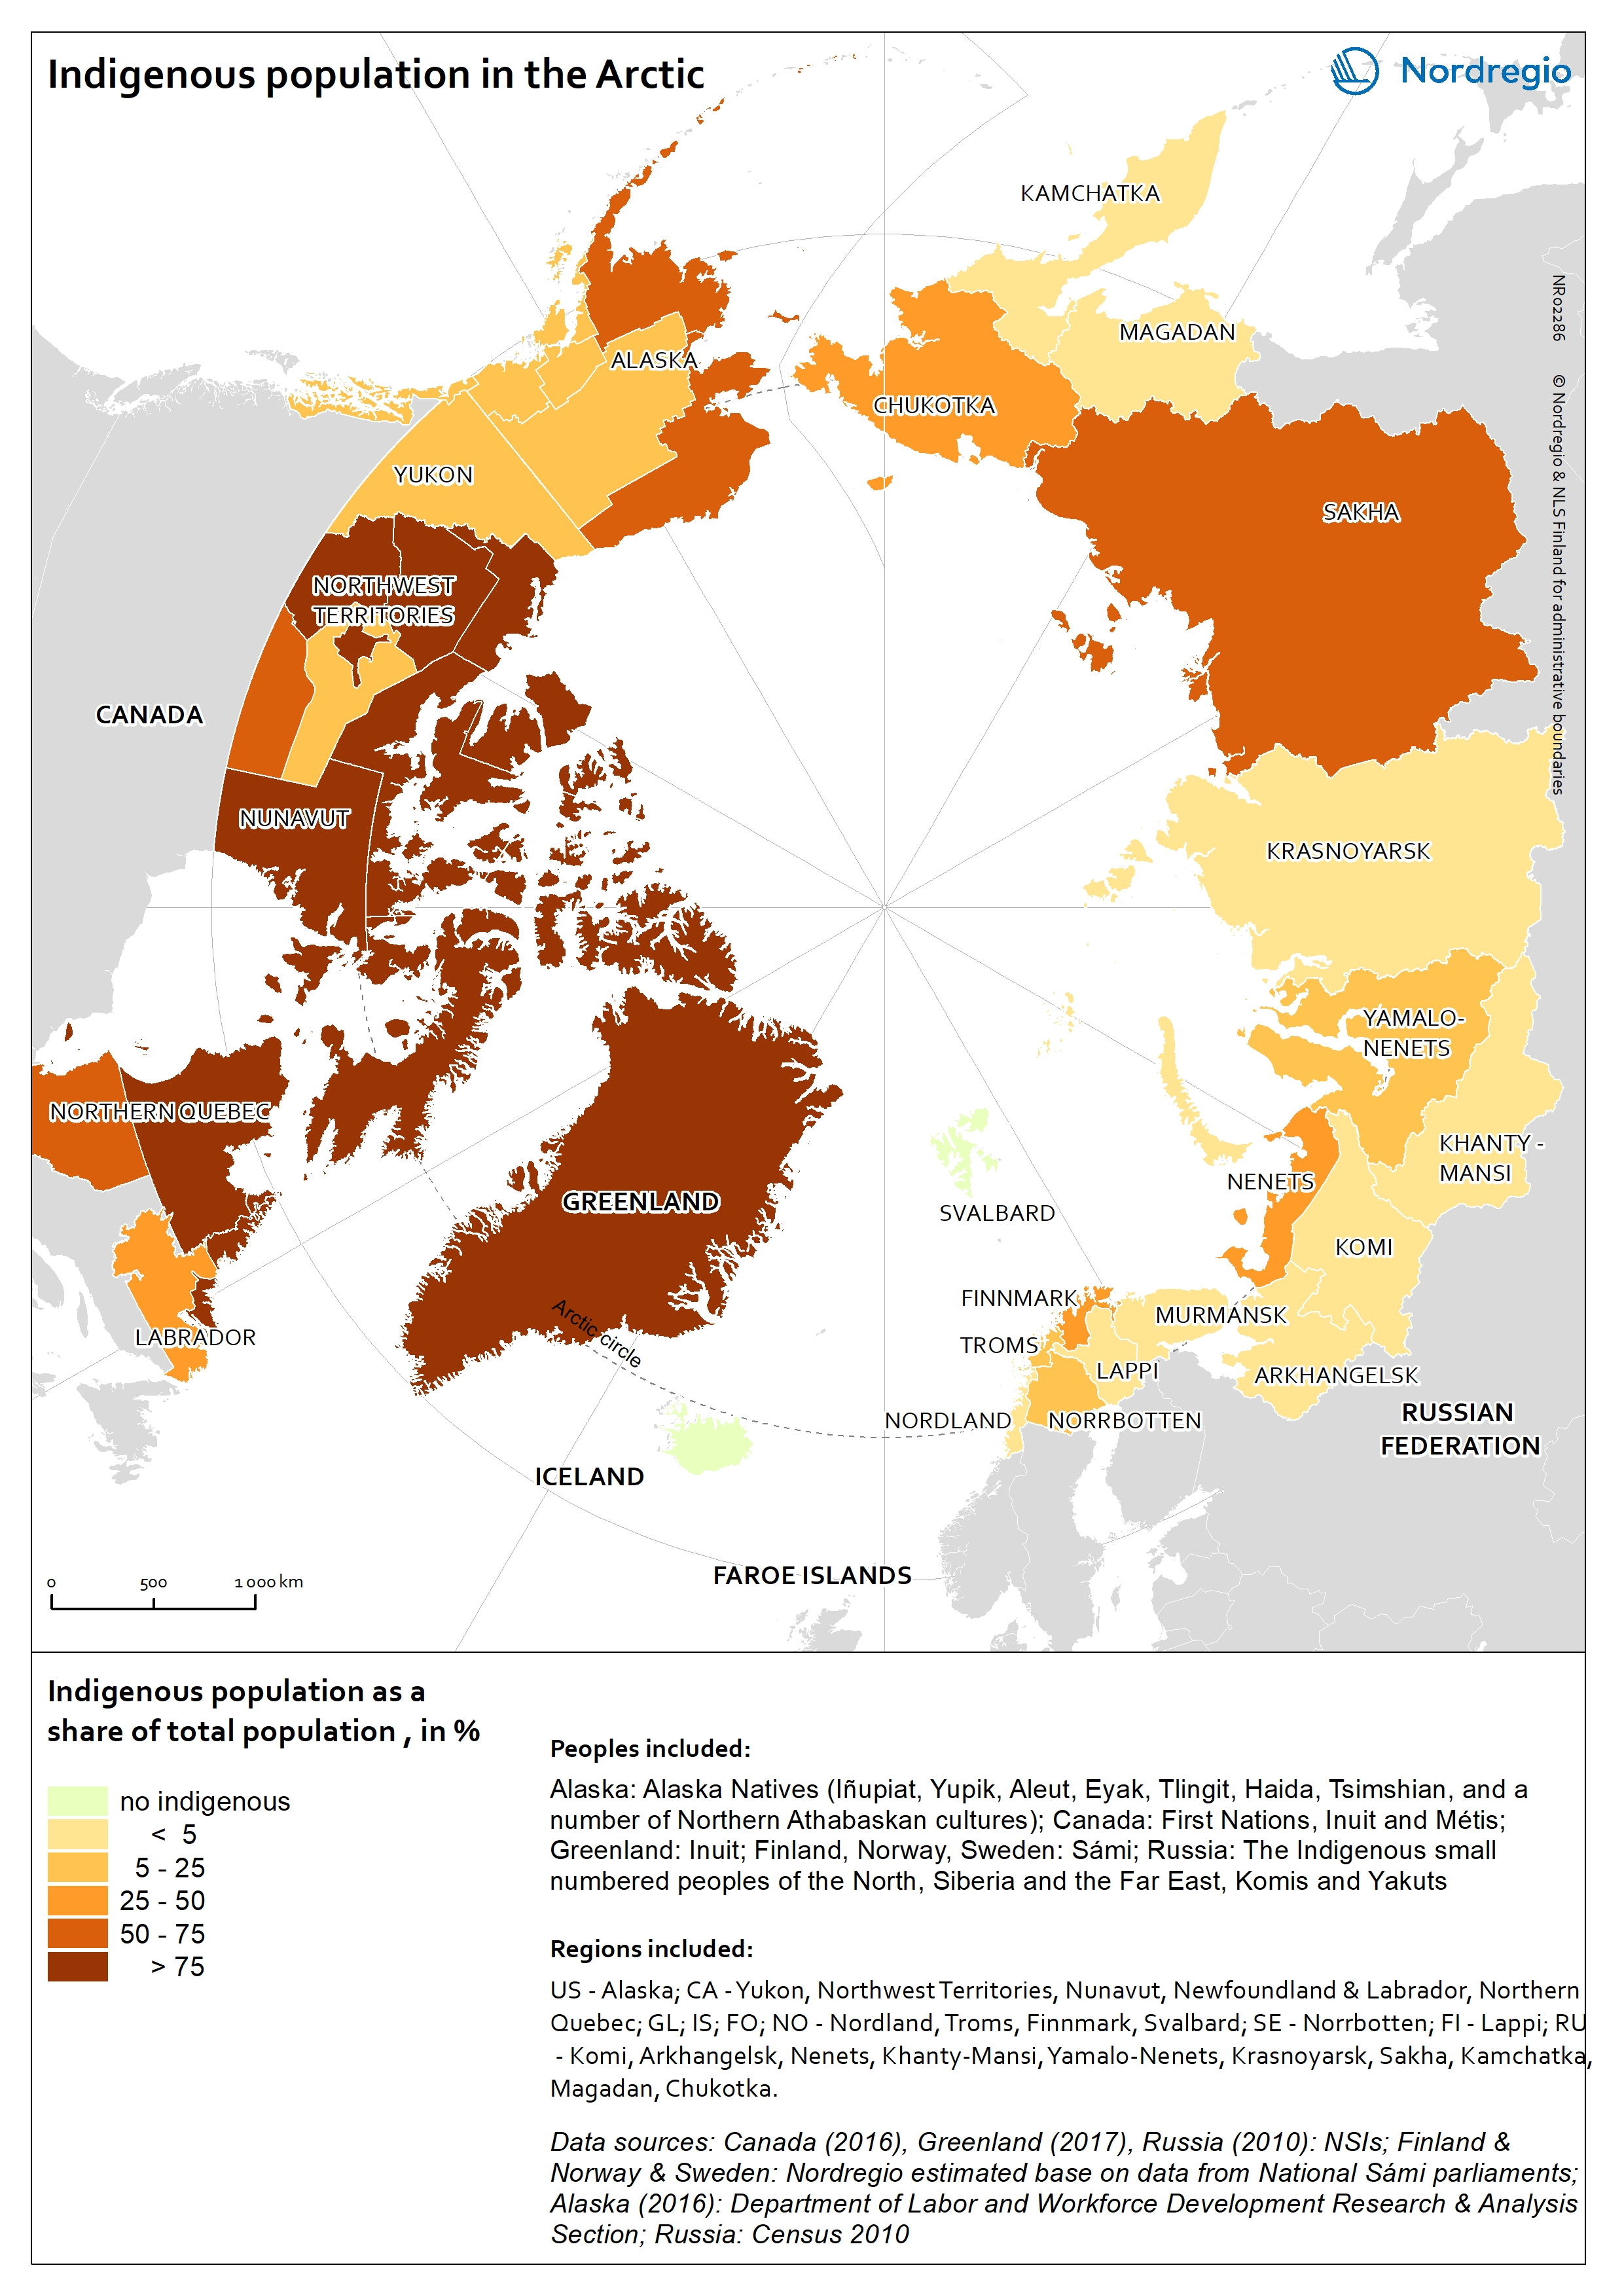 Map of indigenous peoples in the Arctic